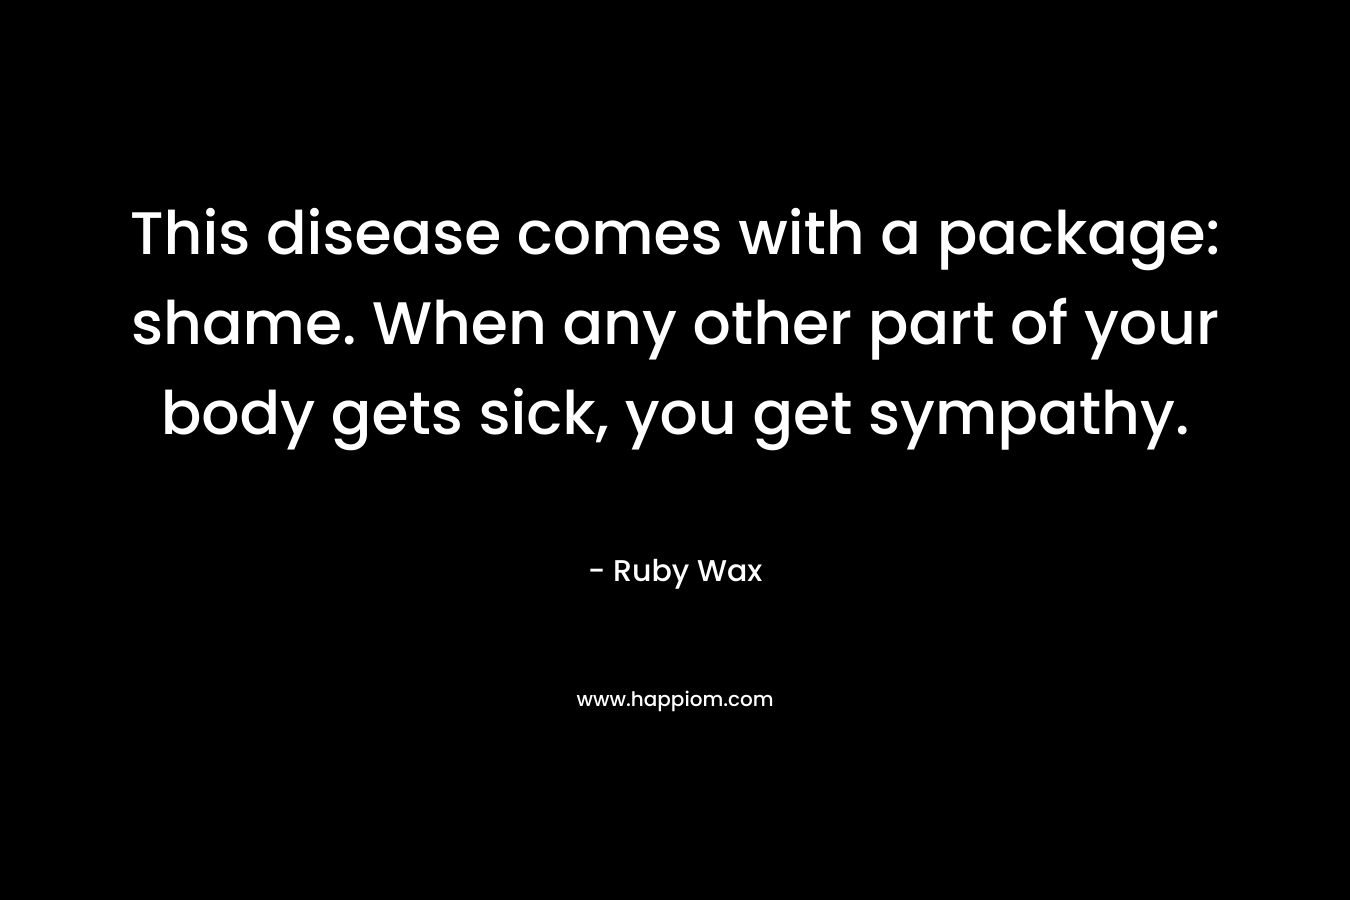 This disease comes with a package: shame. When any other part of your body gets sick, you get sympathy. – Ruby Wax